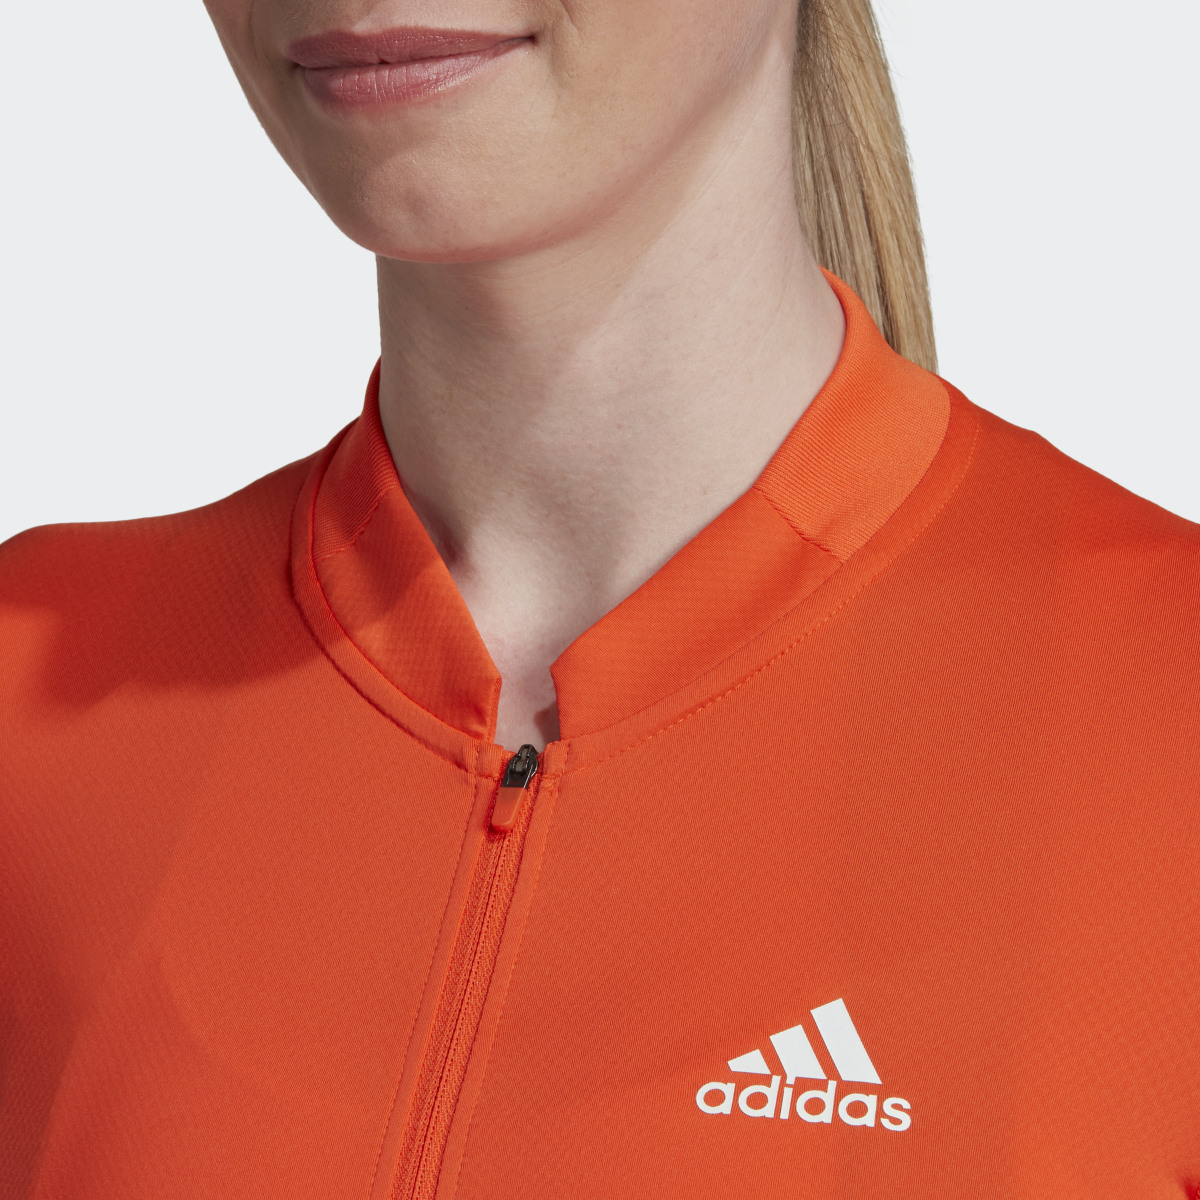 Adidas The Short Sleeve Cycling Jersey. 7